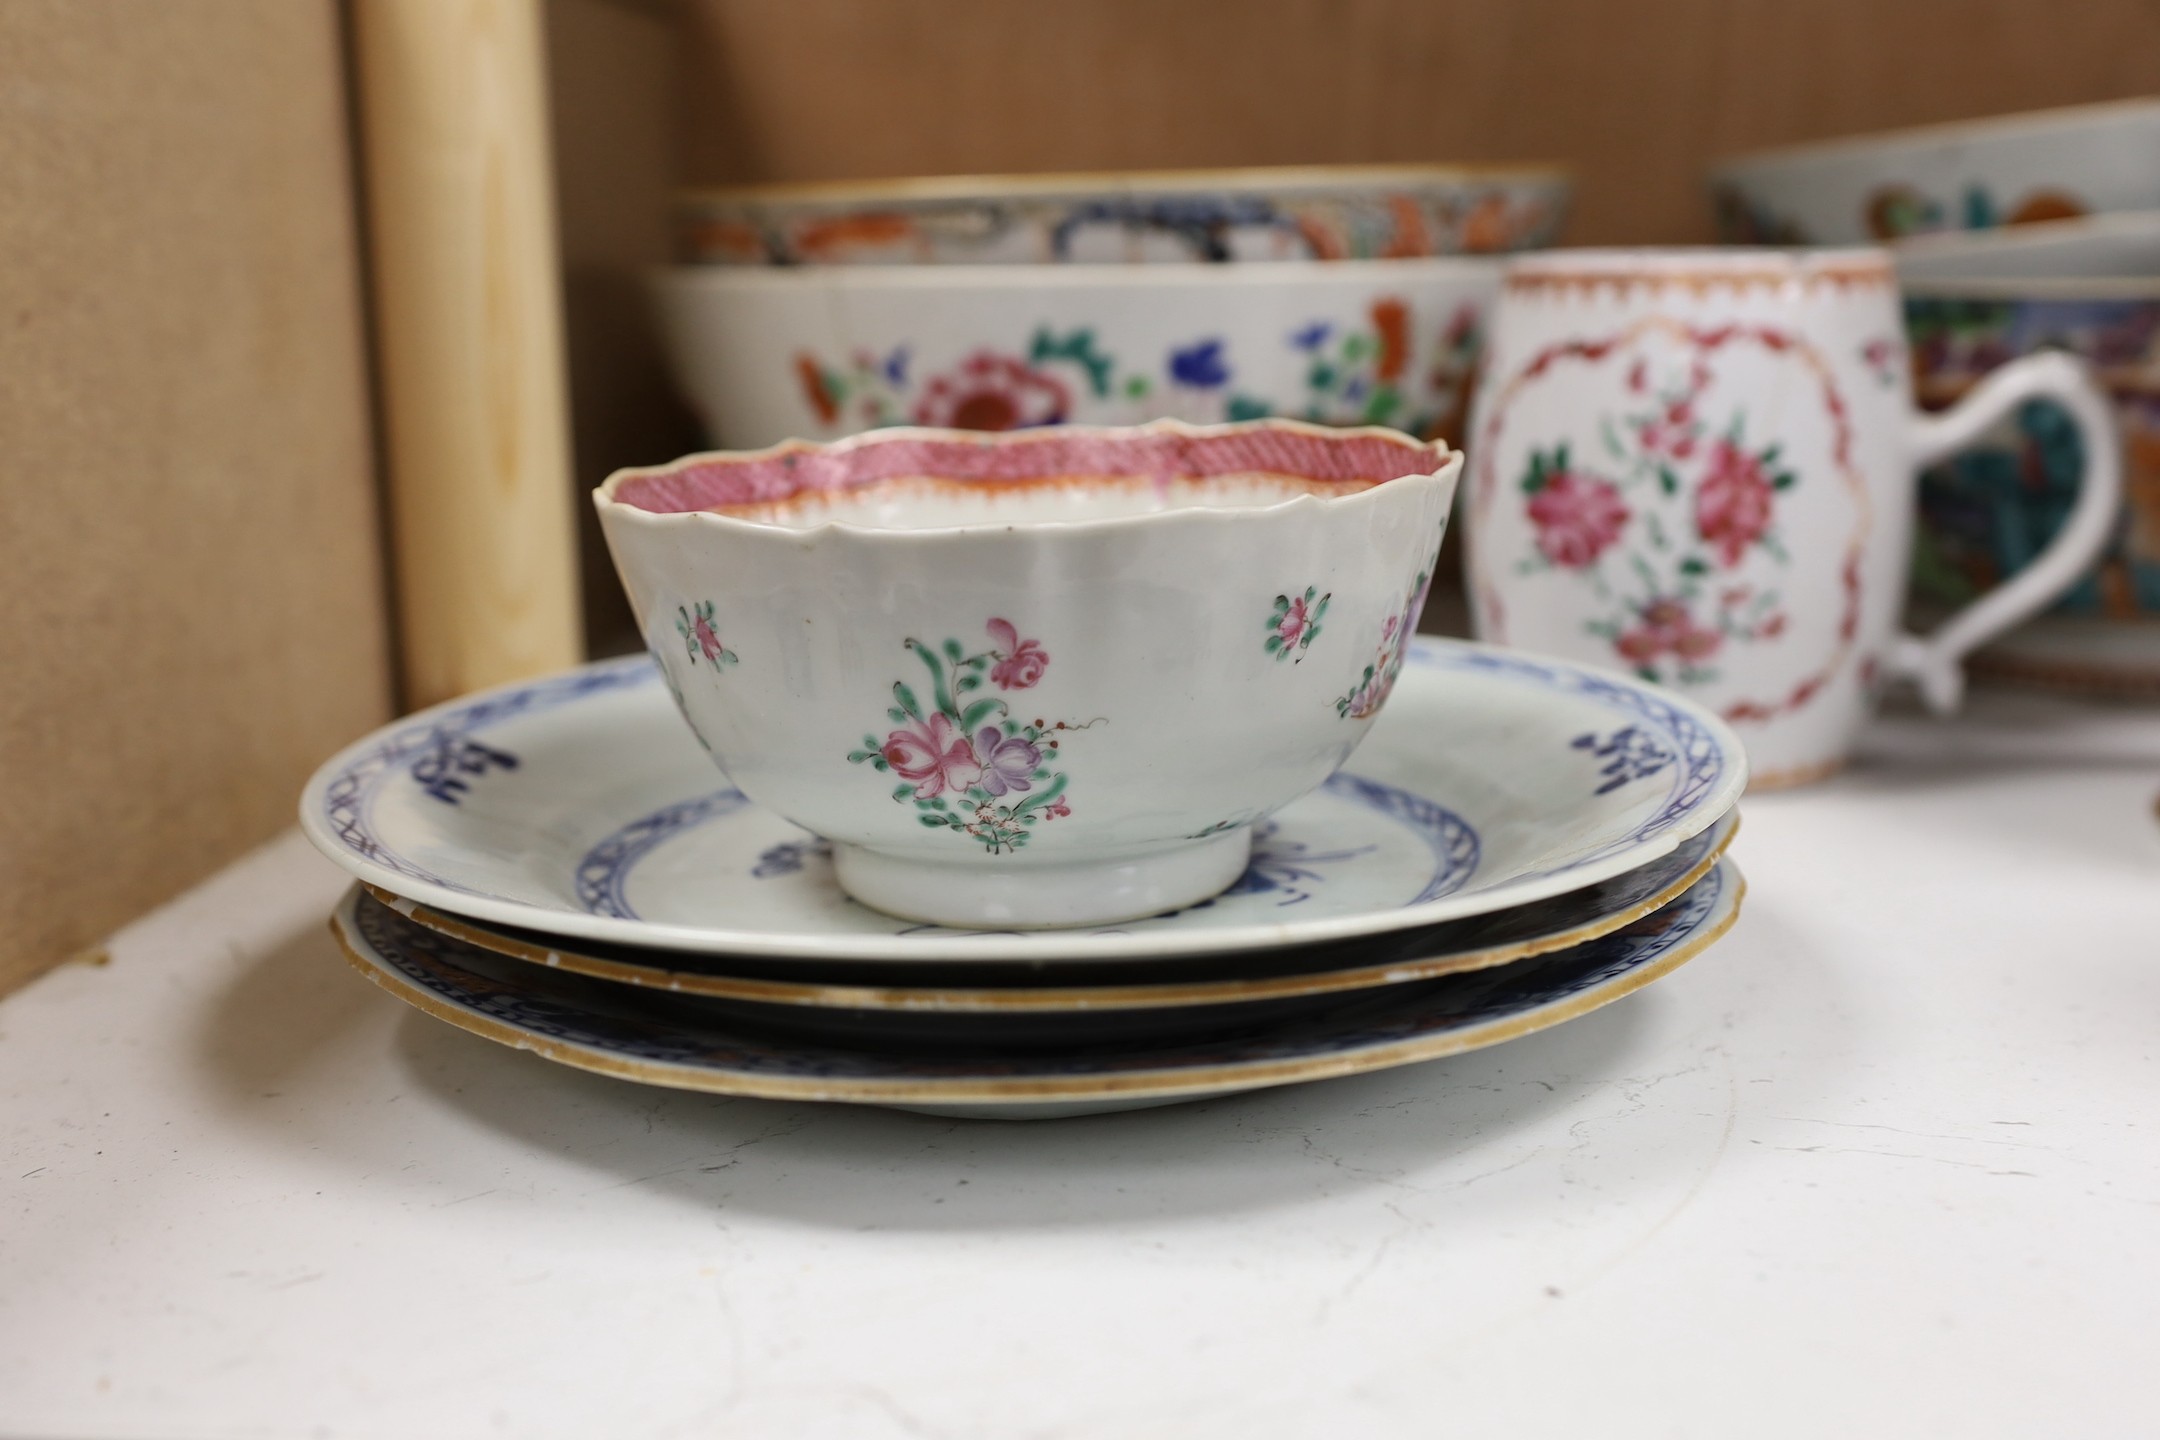 A large selection of 18th century Chinese export porcelain bowls, plates and mugs a/f